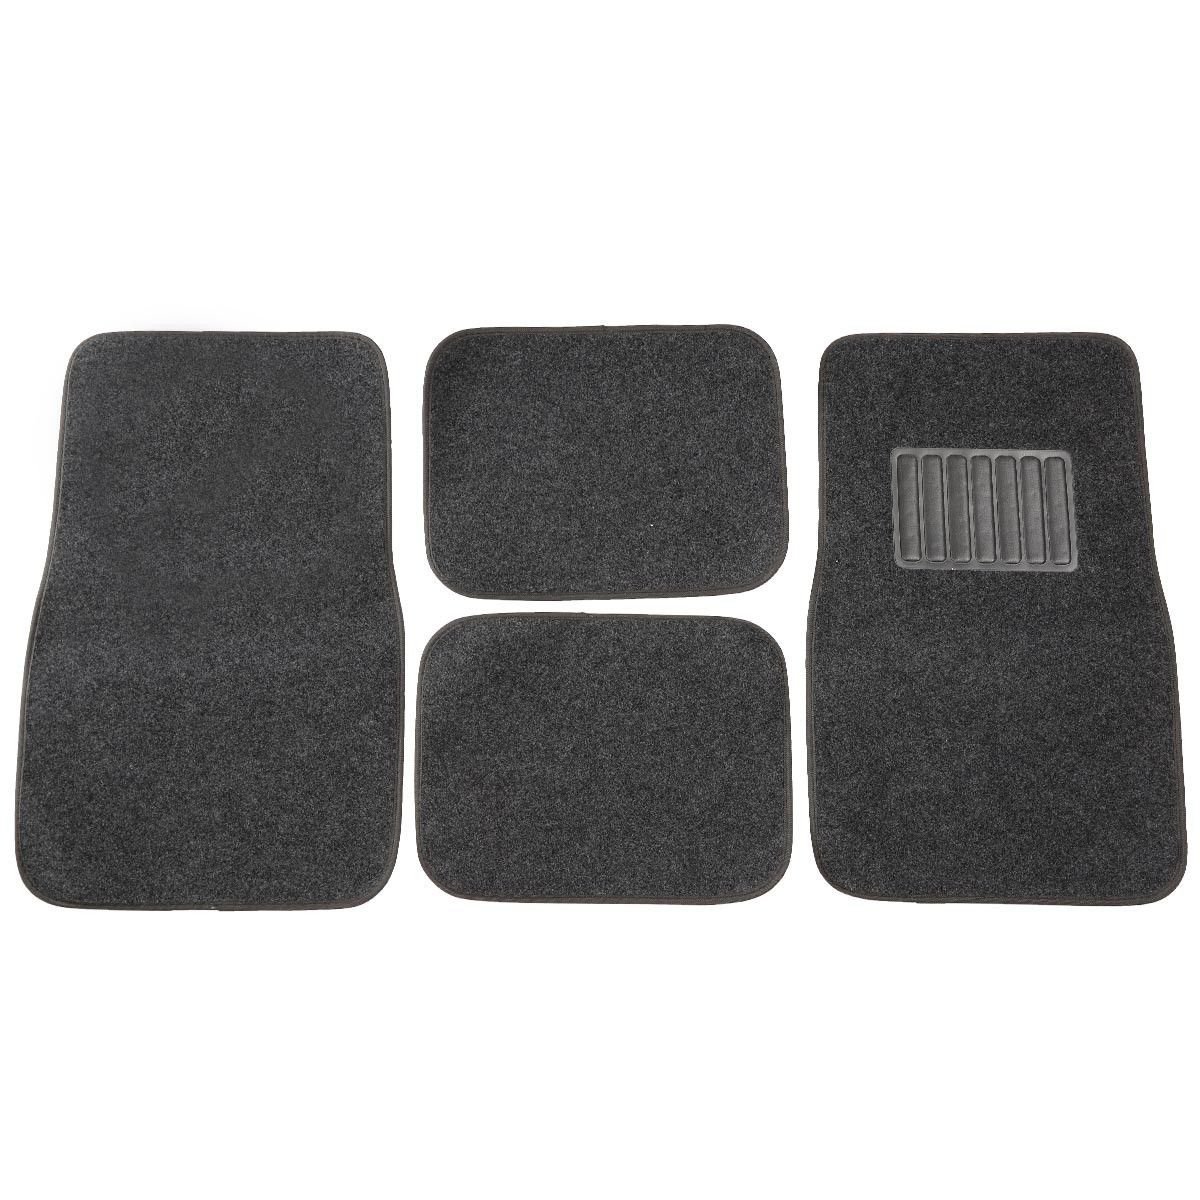 Suv replacement carpet and floor mats nissan truck #4